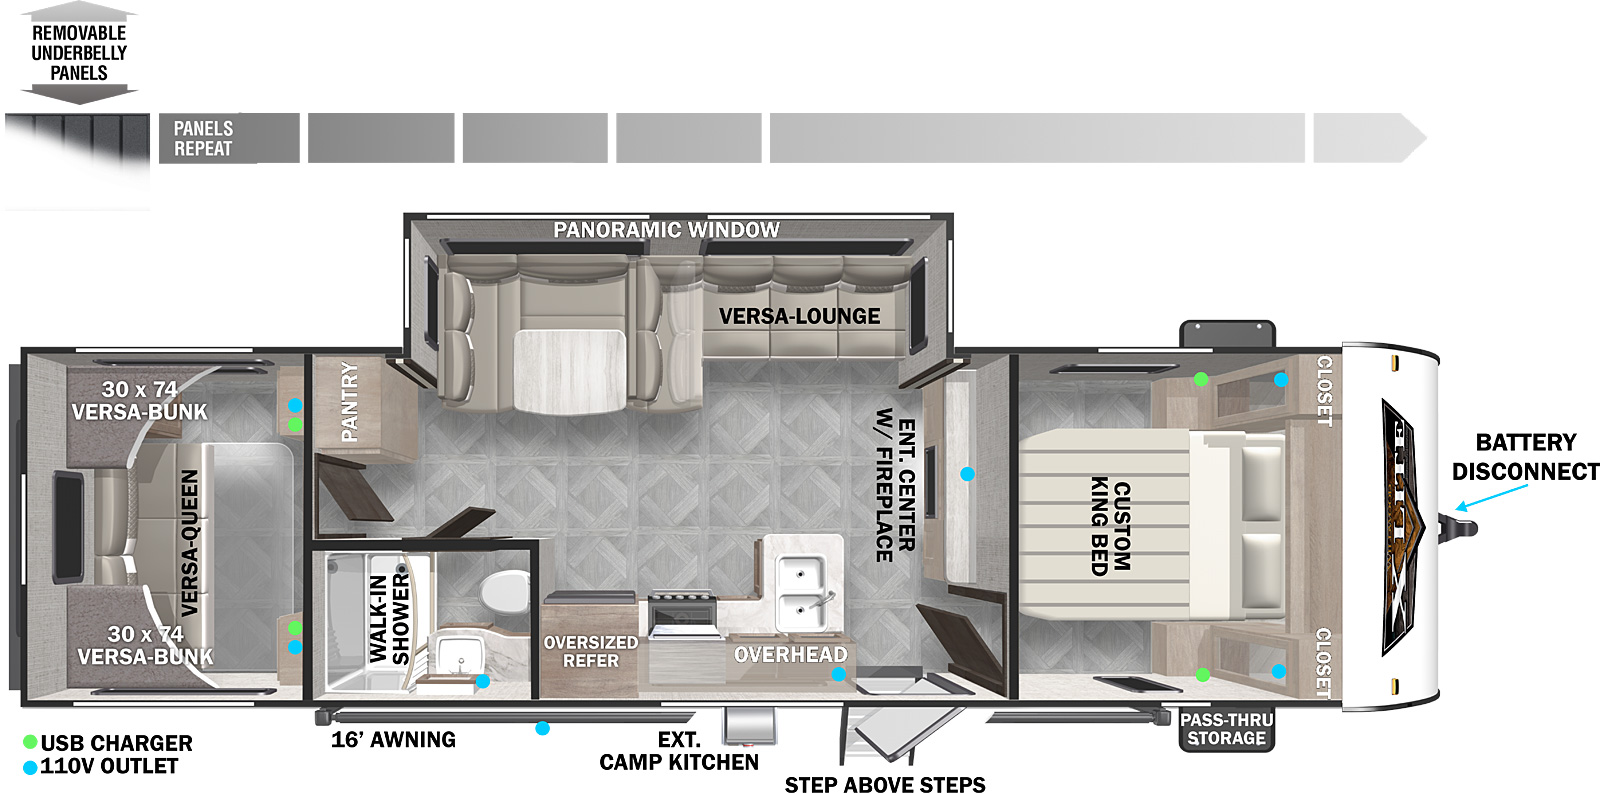 The 28VBXL has one slideout and one entry. Exterior features include a 16 foot awning, exterior camp kitchen, step above entry steps, front pass-thru storage, battery disconnect, and removeable underbelly panels. Interior layout front to back: custom king bed with closets on each side; entertainment center with fireplace along inner wall; off-door side slideout with versa lounge/u-dinette and panoramic window; door side entry and kitchen with peninsula countertop with sink, overhead cabinet, and oversized refrigerator; door side full bathroom with walk-in shower; off-door side pantry along inner wall; rear bunk room with versa bunks on each side above a versa queen.